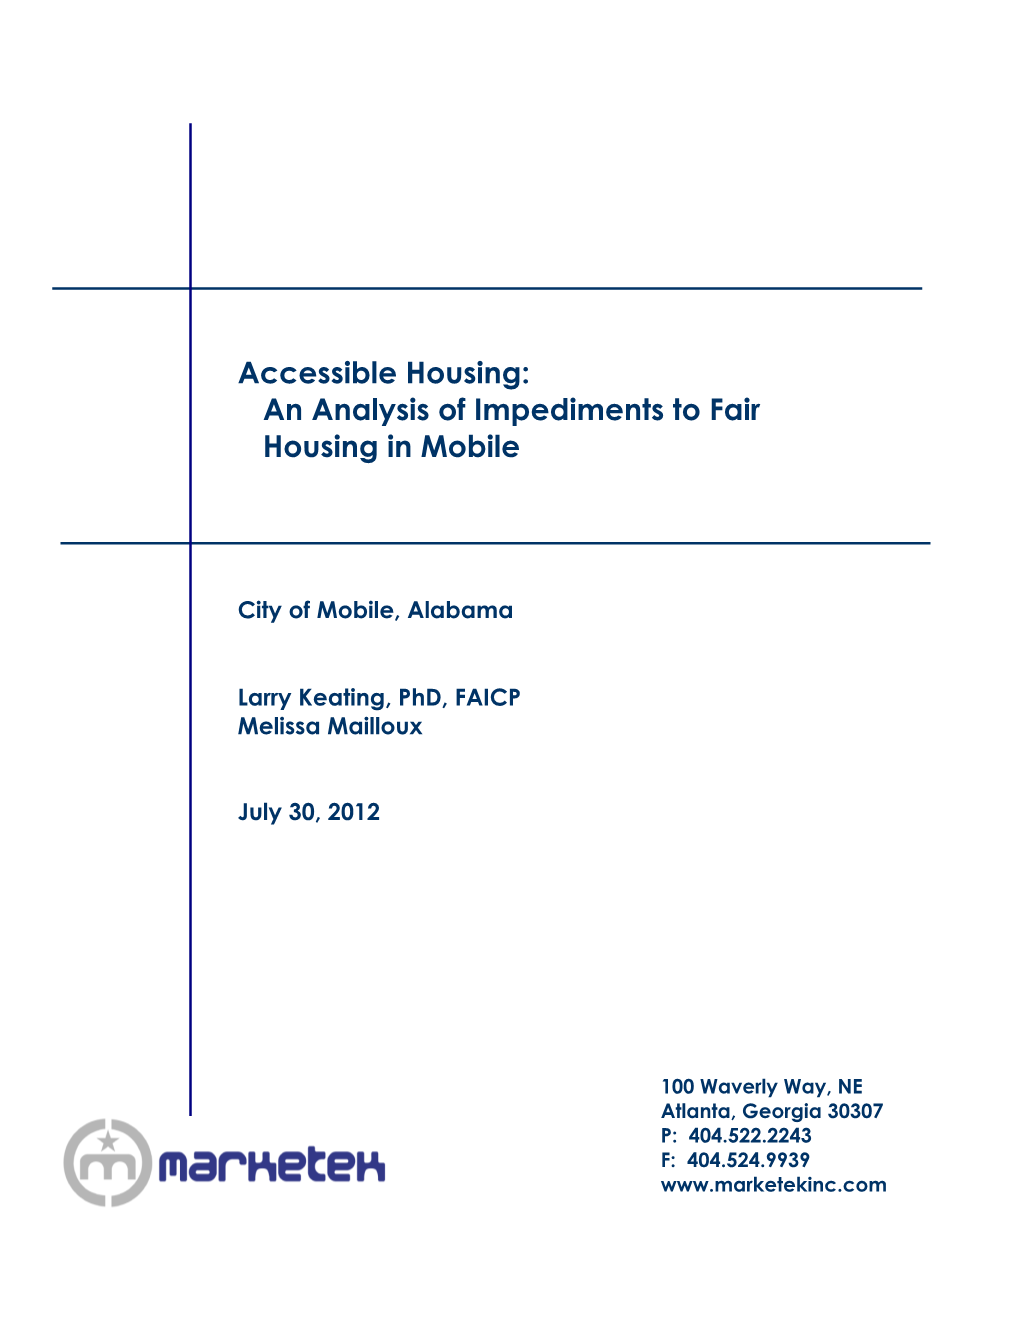 An Analysis of Impediments to Fair Housing in Mobile